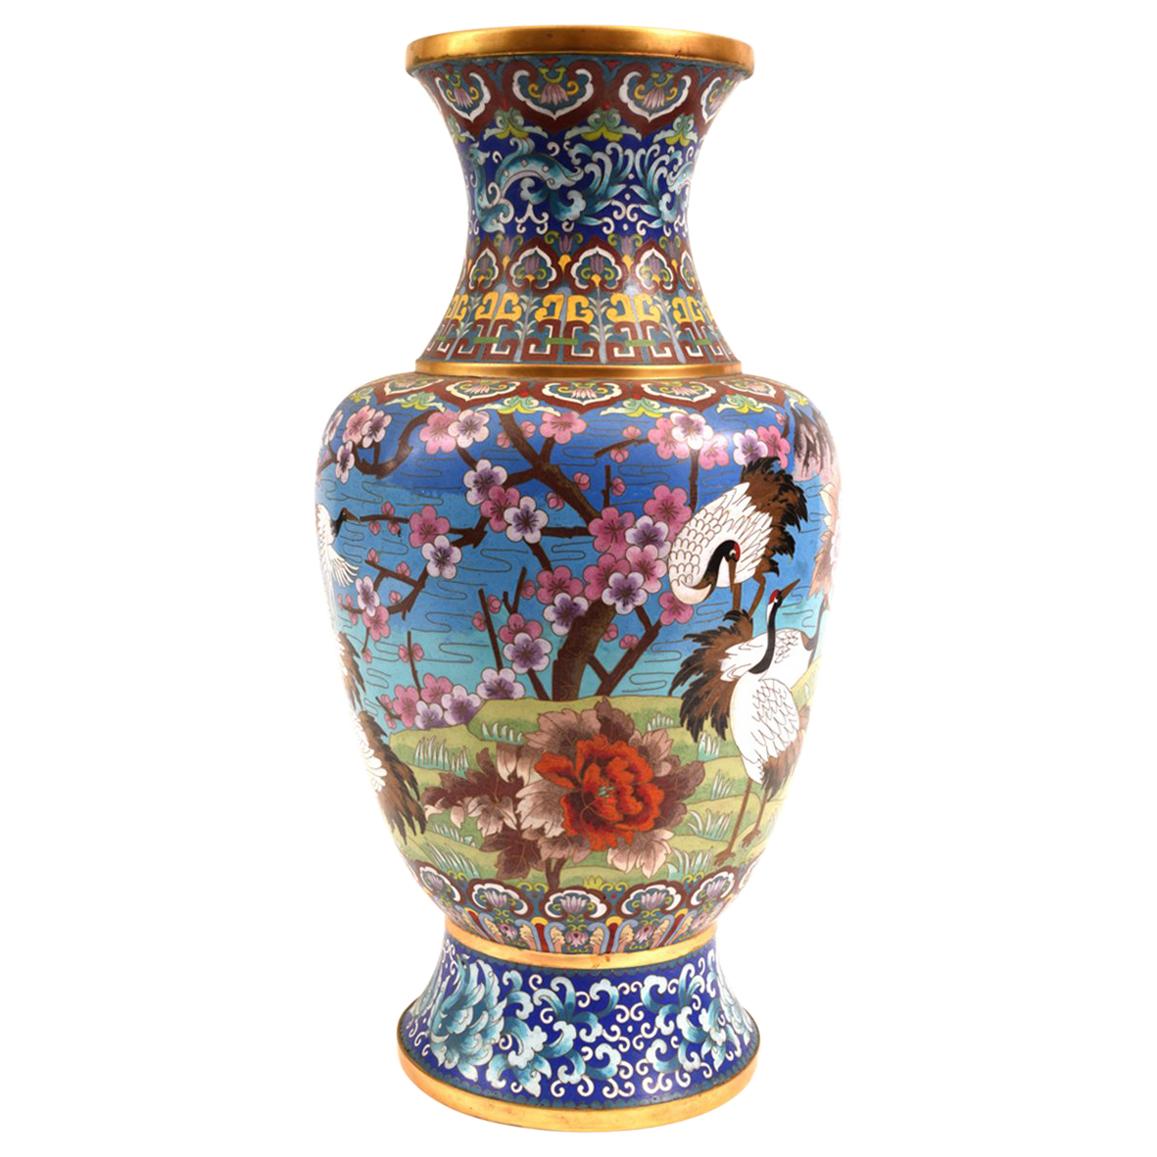 Very Large Decorative Cloisonné with Blossom Flowers Vase or Piece